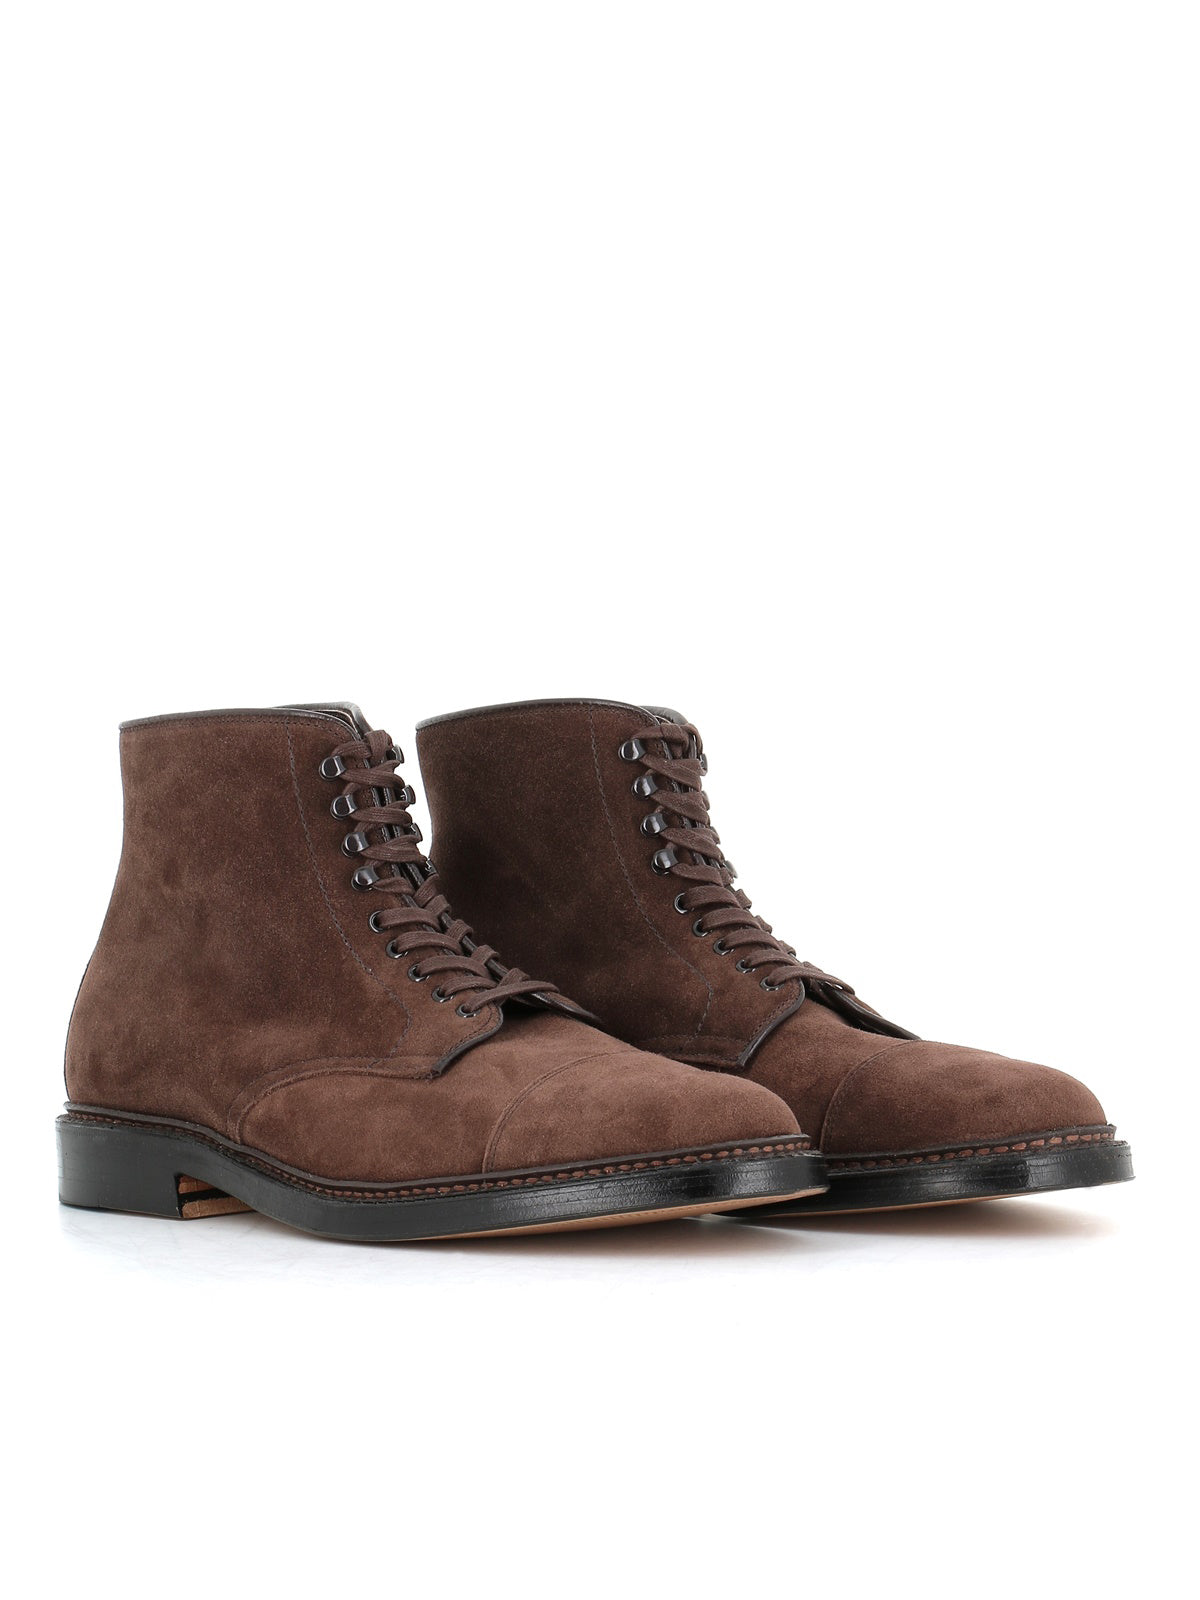  Lace-up Boot 4081 Hy Alden Uomo Marrone - 2